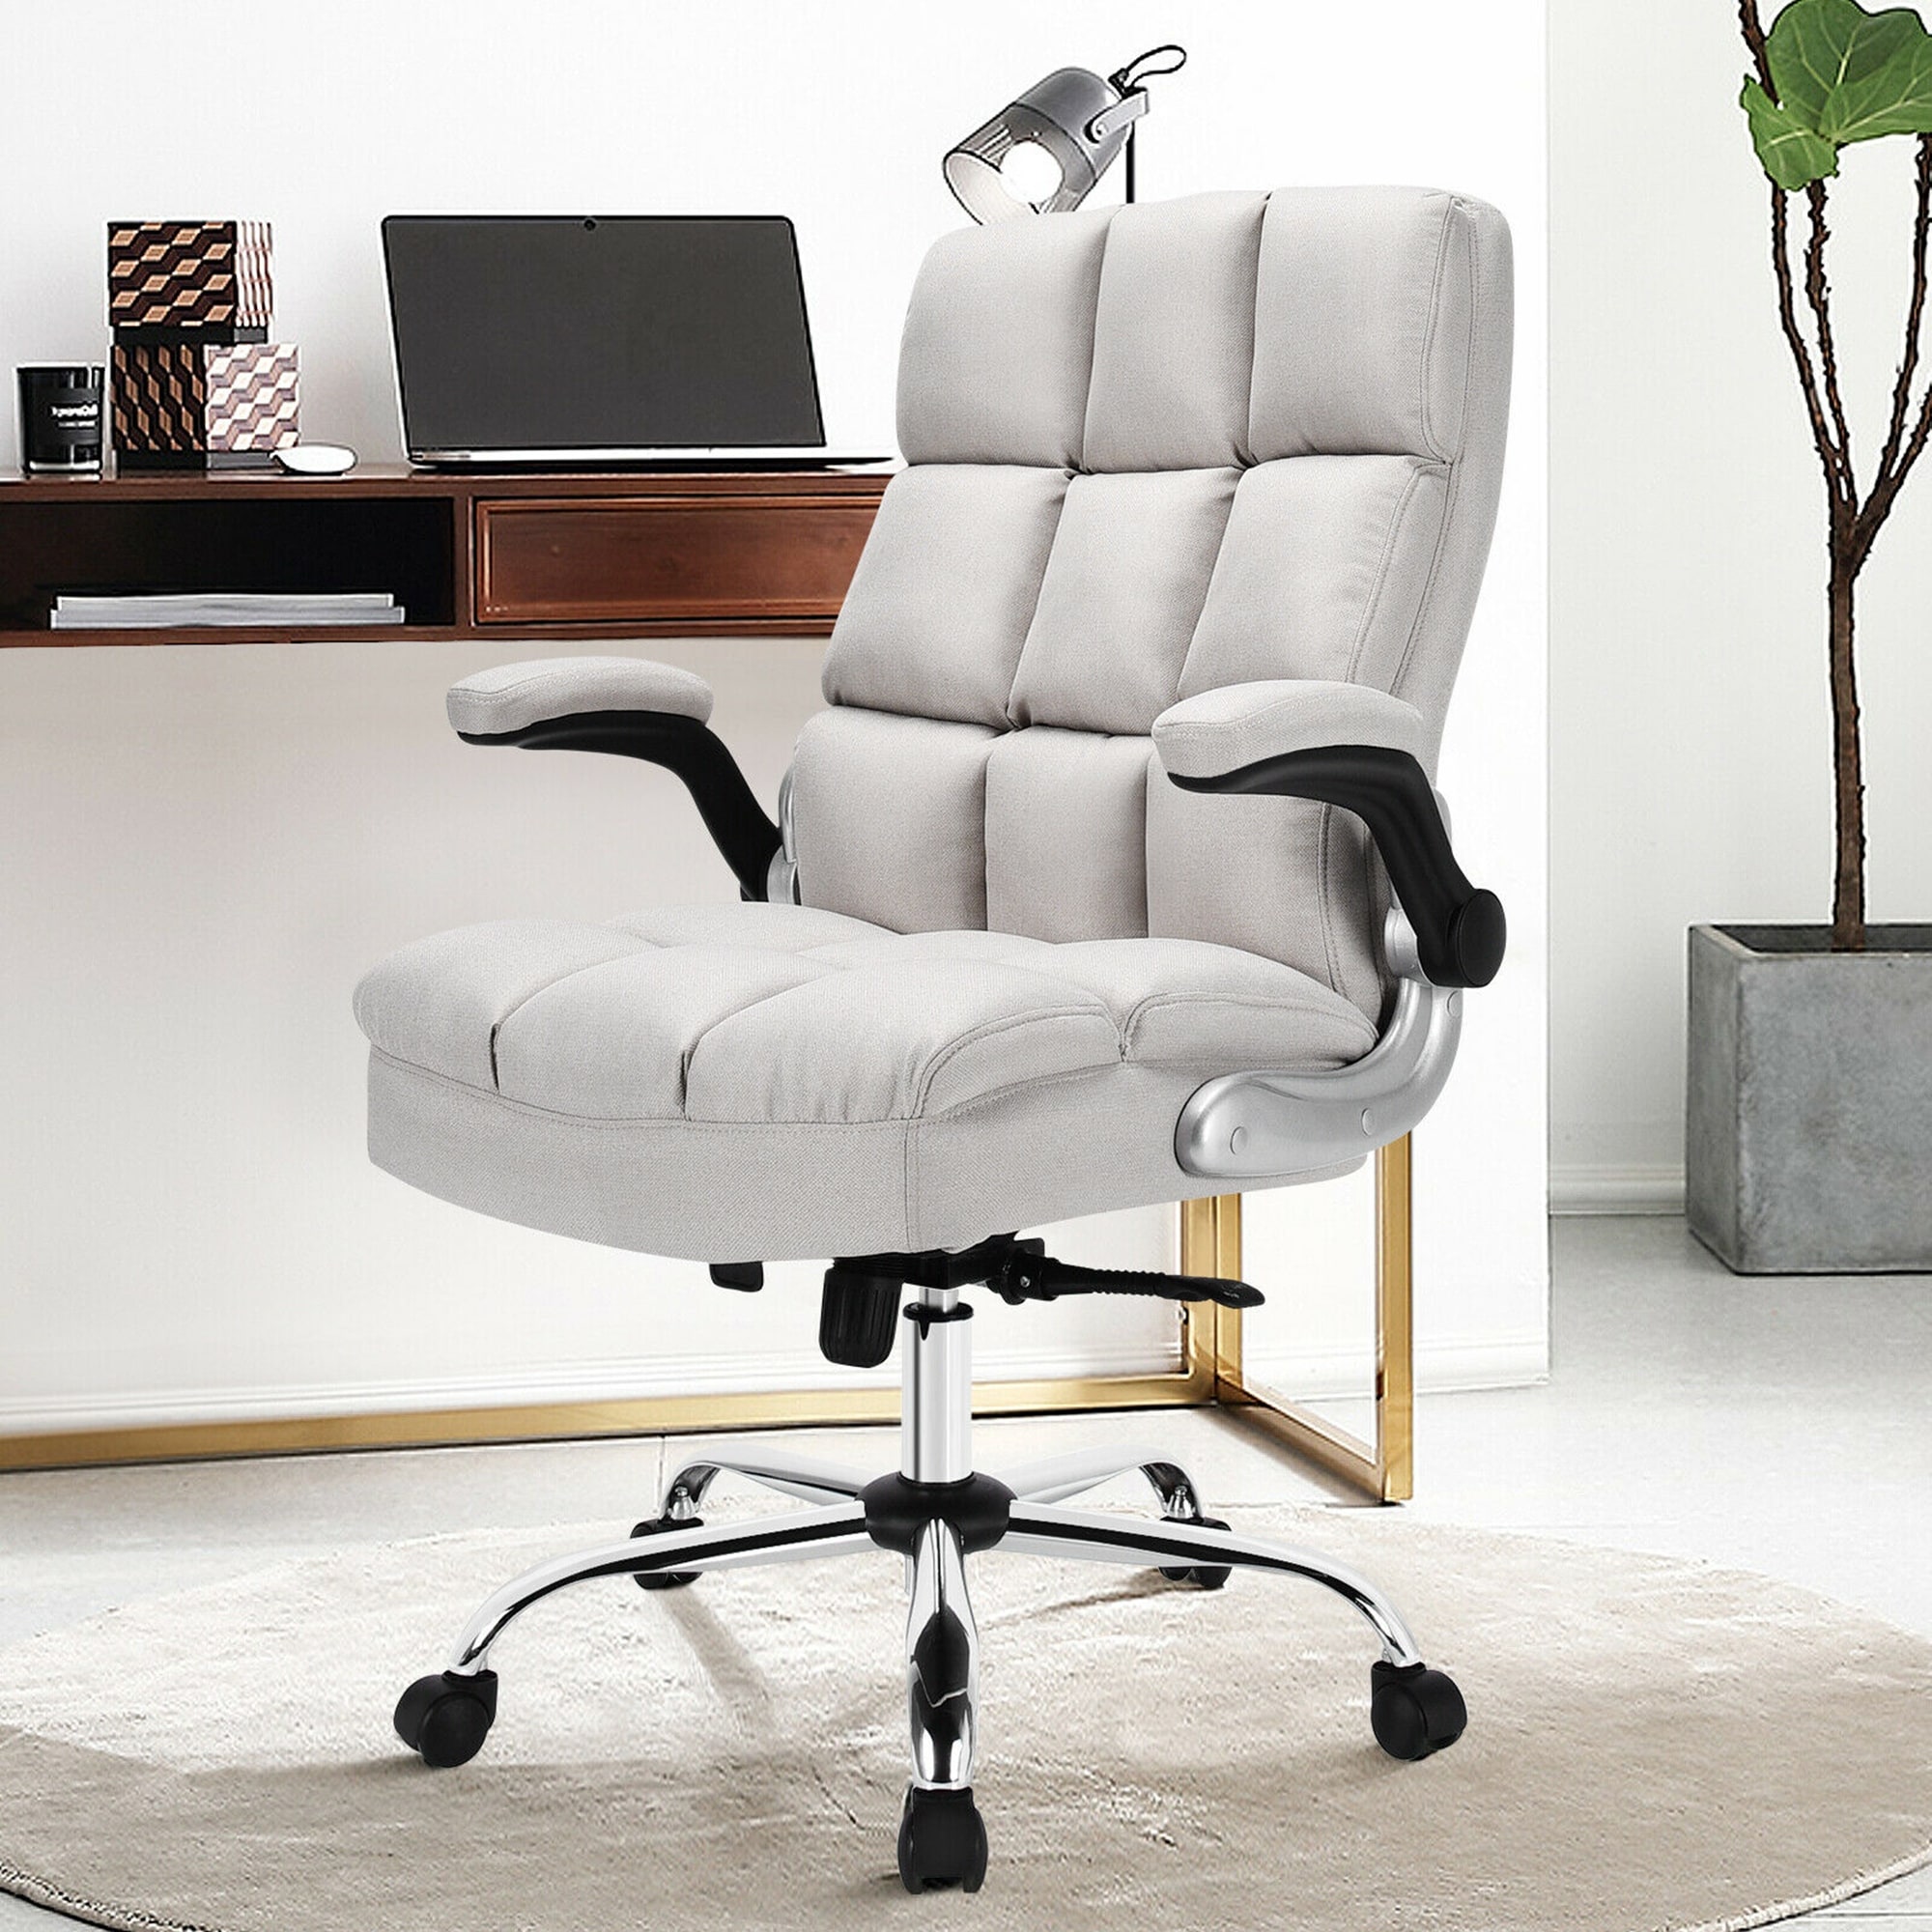 Gymax Faux Leather High Back Reclining Office Chair Ergonomic